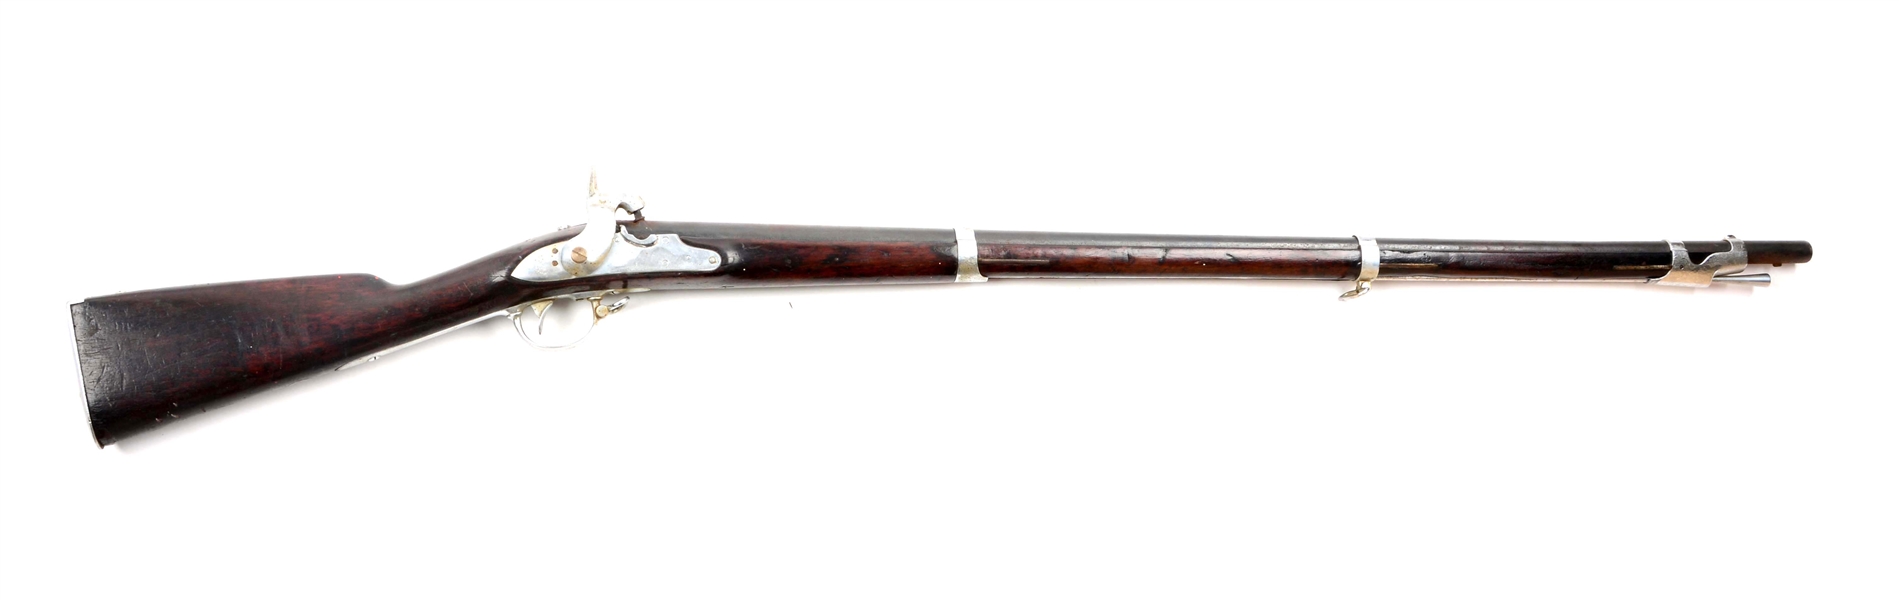 (A) U.S. SPRINGFIELD MODEL 1835 CONVERSION MUSKET DATED 1842.